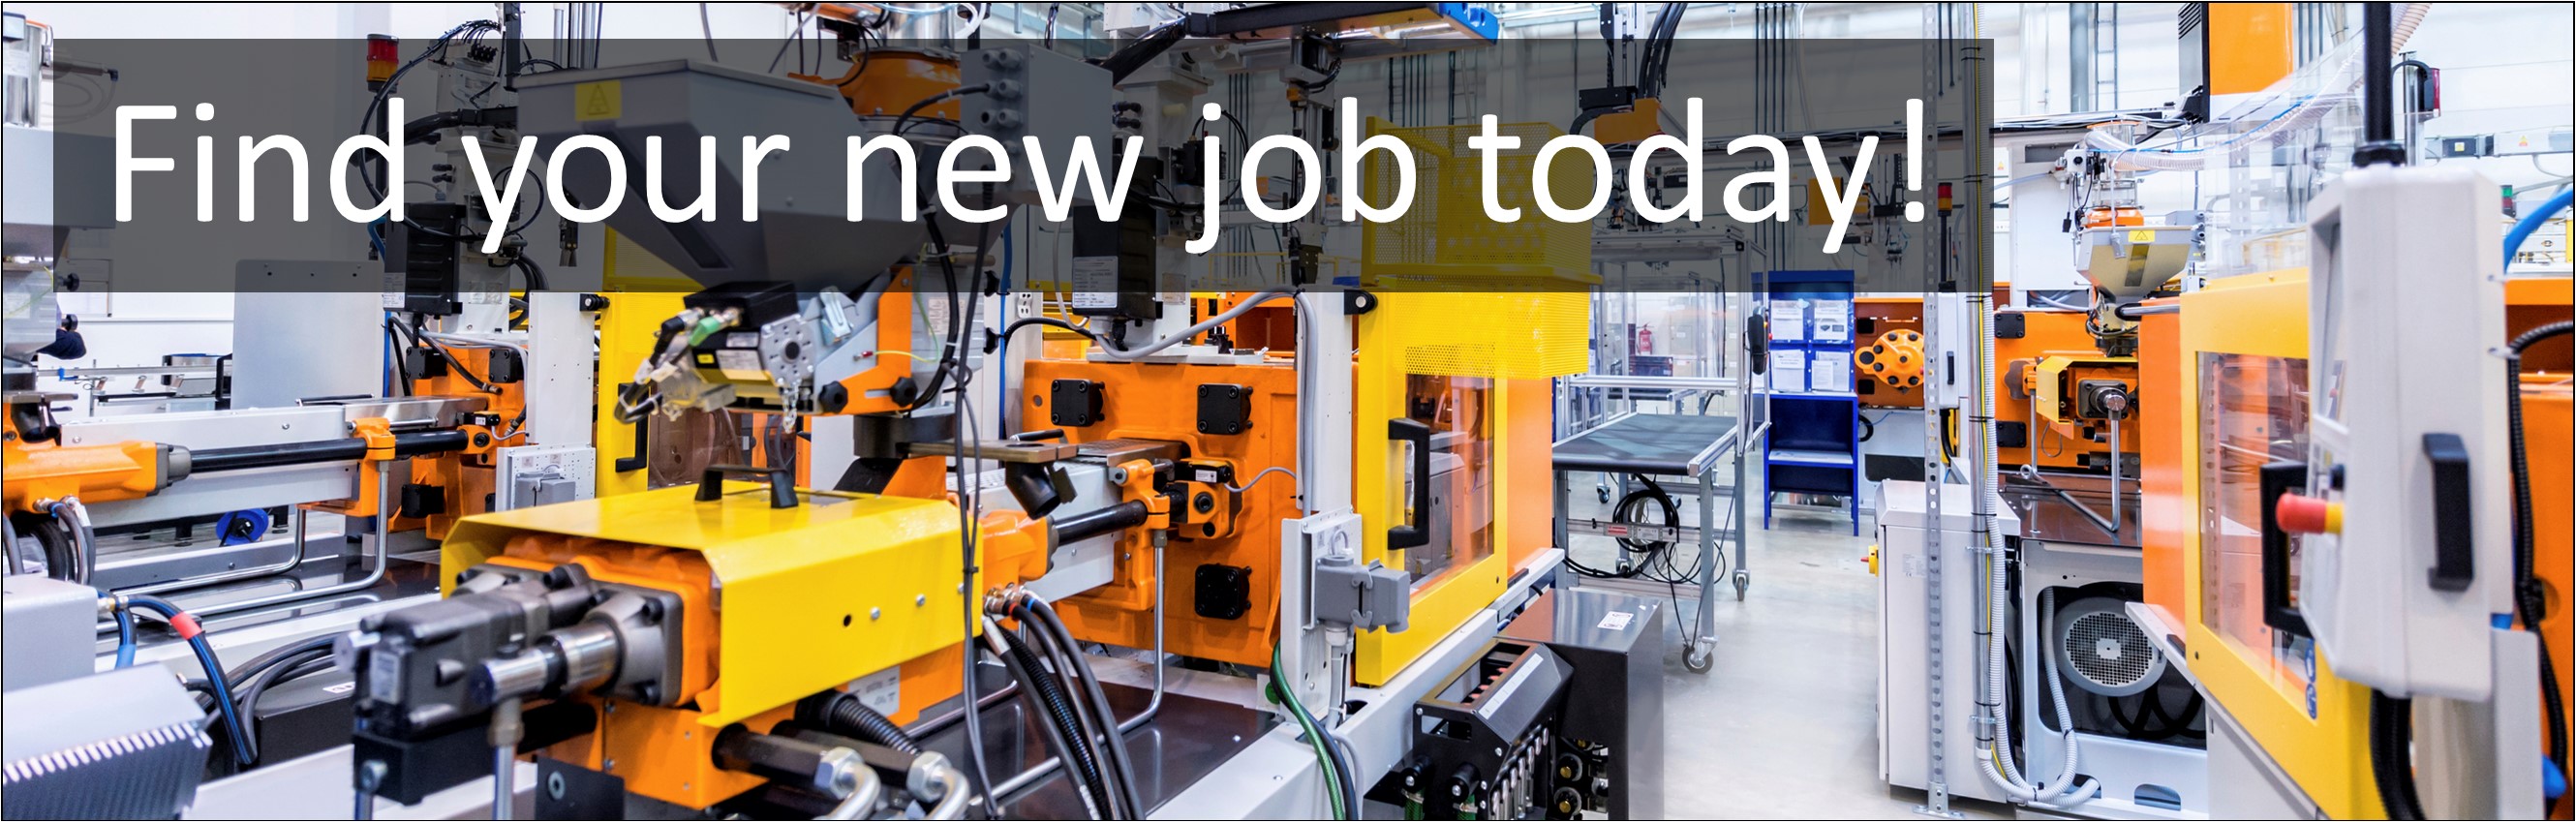 Manufacturing Jobs. Process Operator Apprentice / Manufacturing Apprenticeship Jobs, Careers & Vacancies in Carrington, Manchester, North West England Advertised by AWD online – Multi-Job Board Advertising and CV Sourcing Recruitment Services